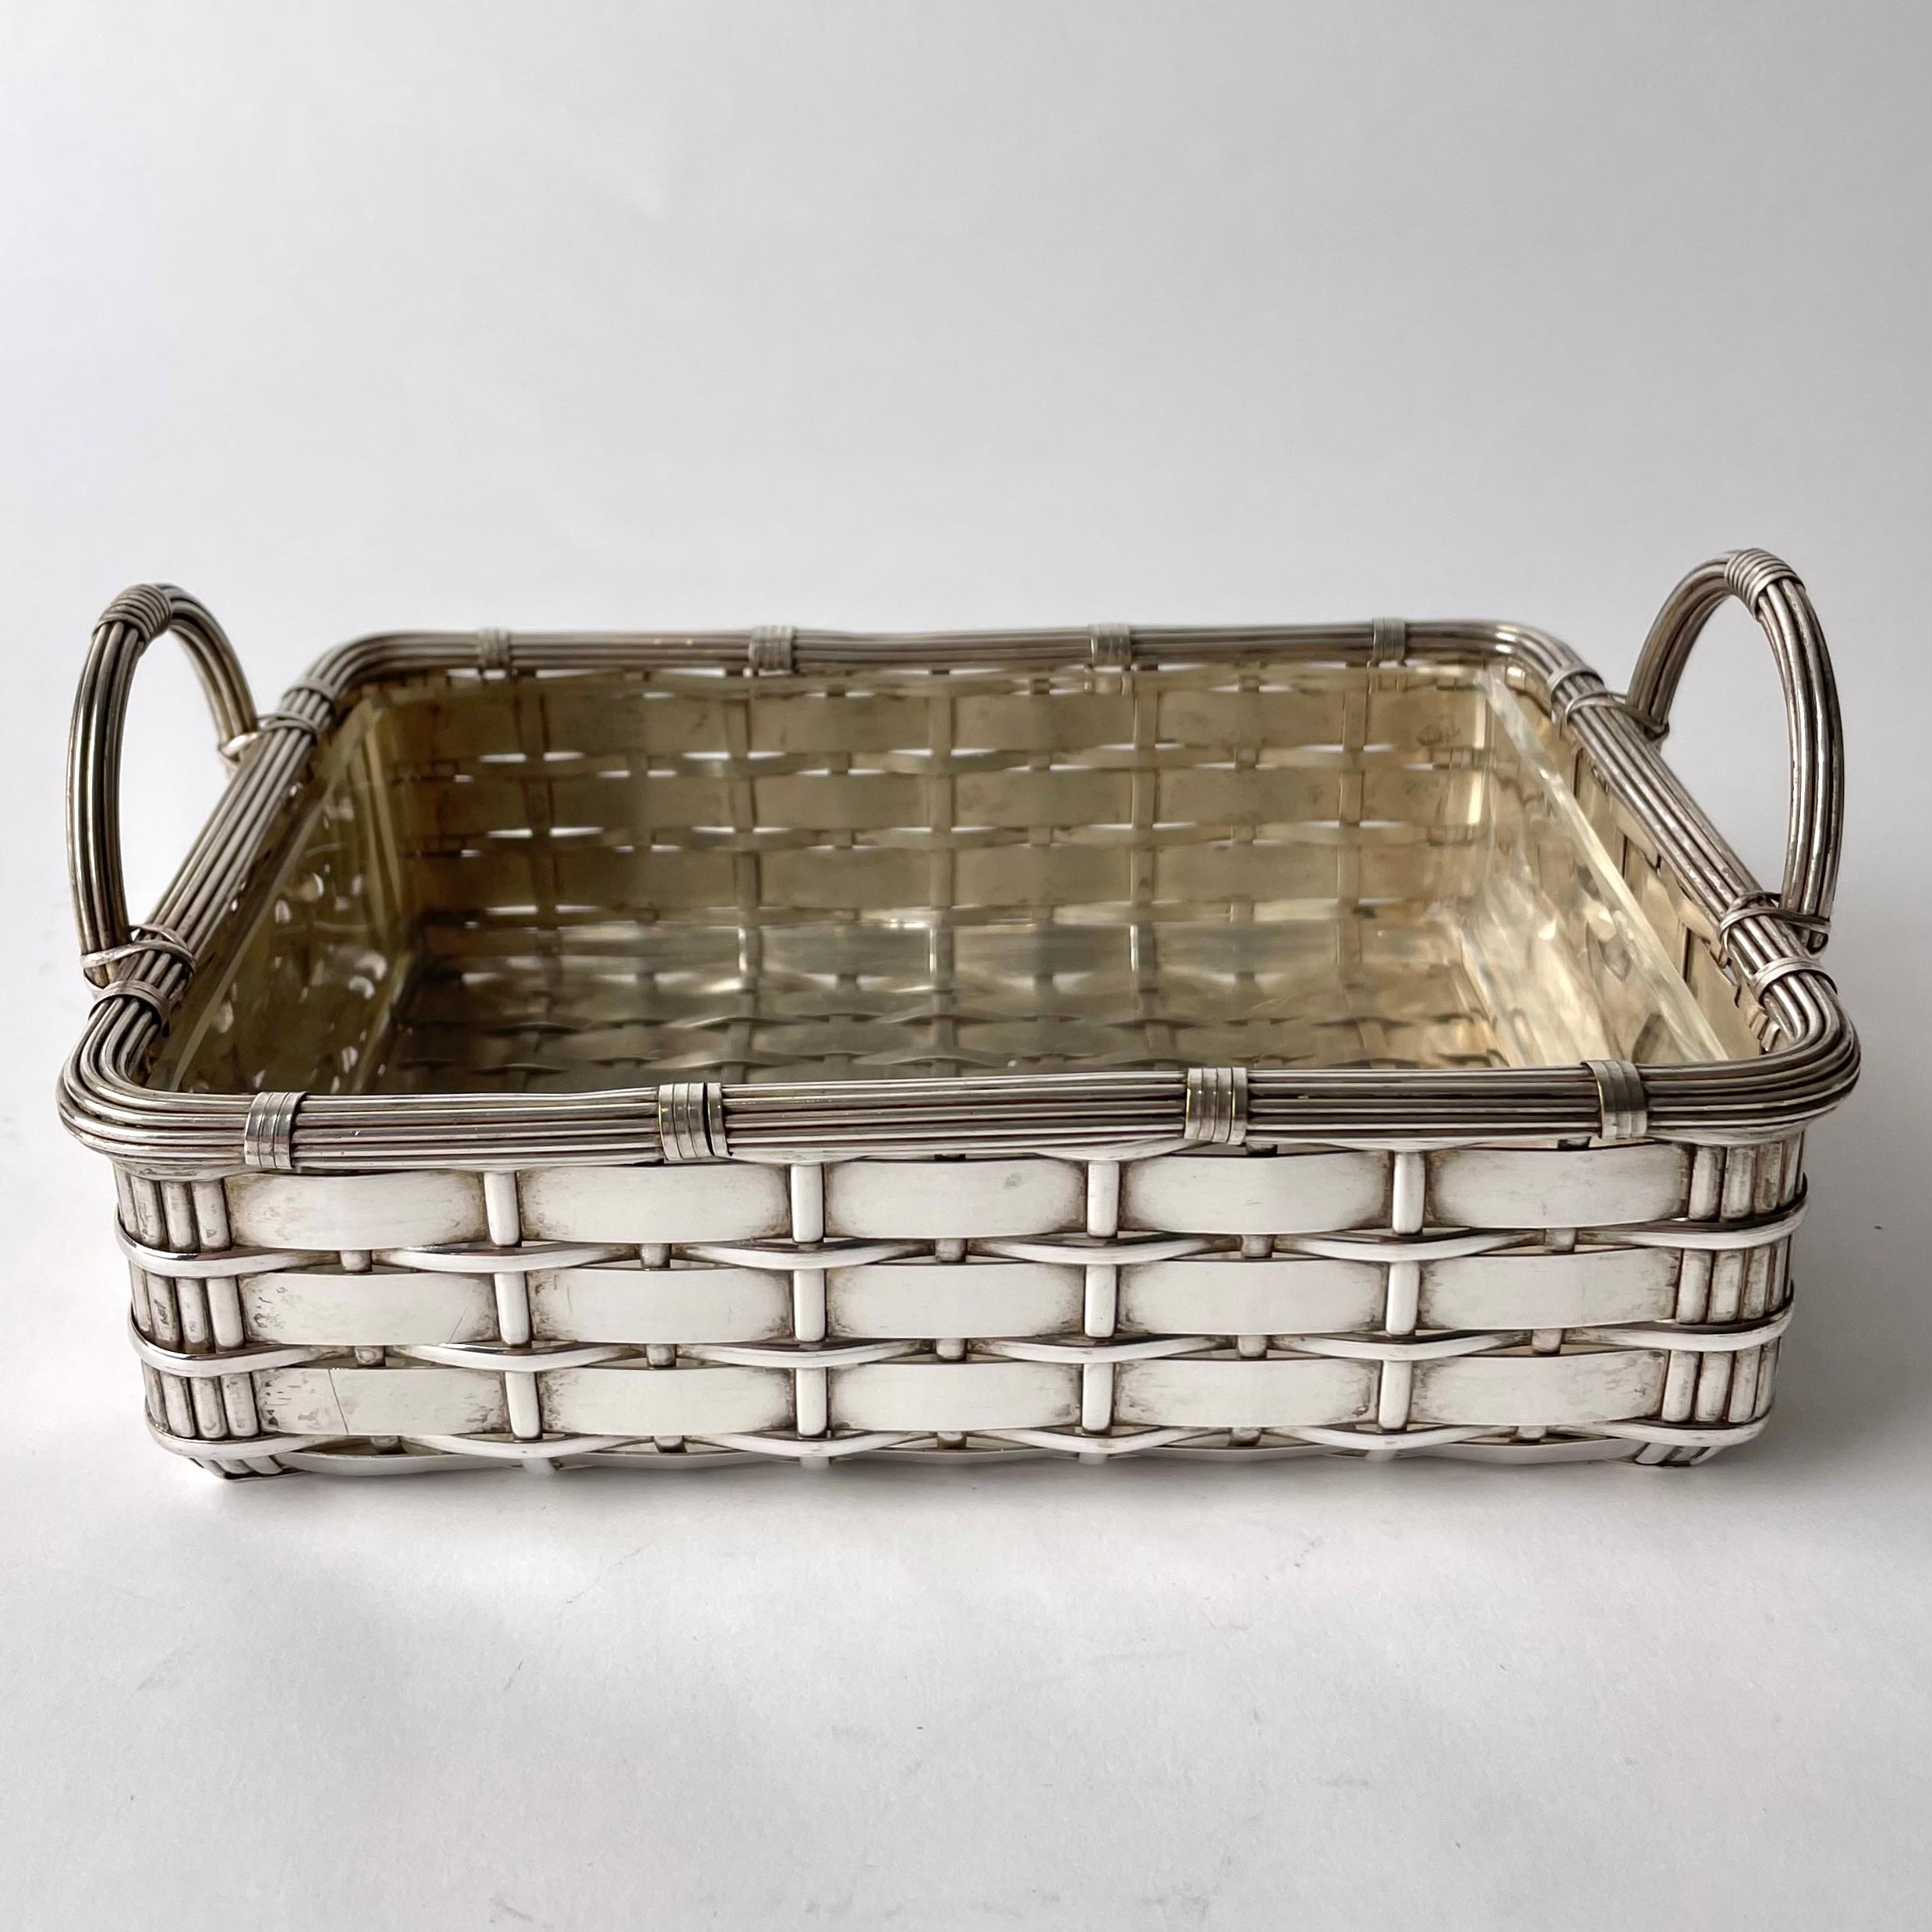 French Serving Bowl in silver plated braided metal with glass insert Early 20th Century For Sale